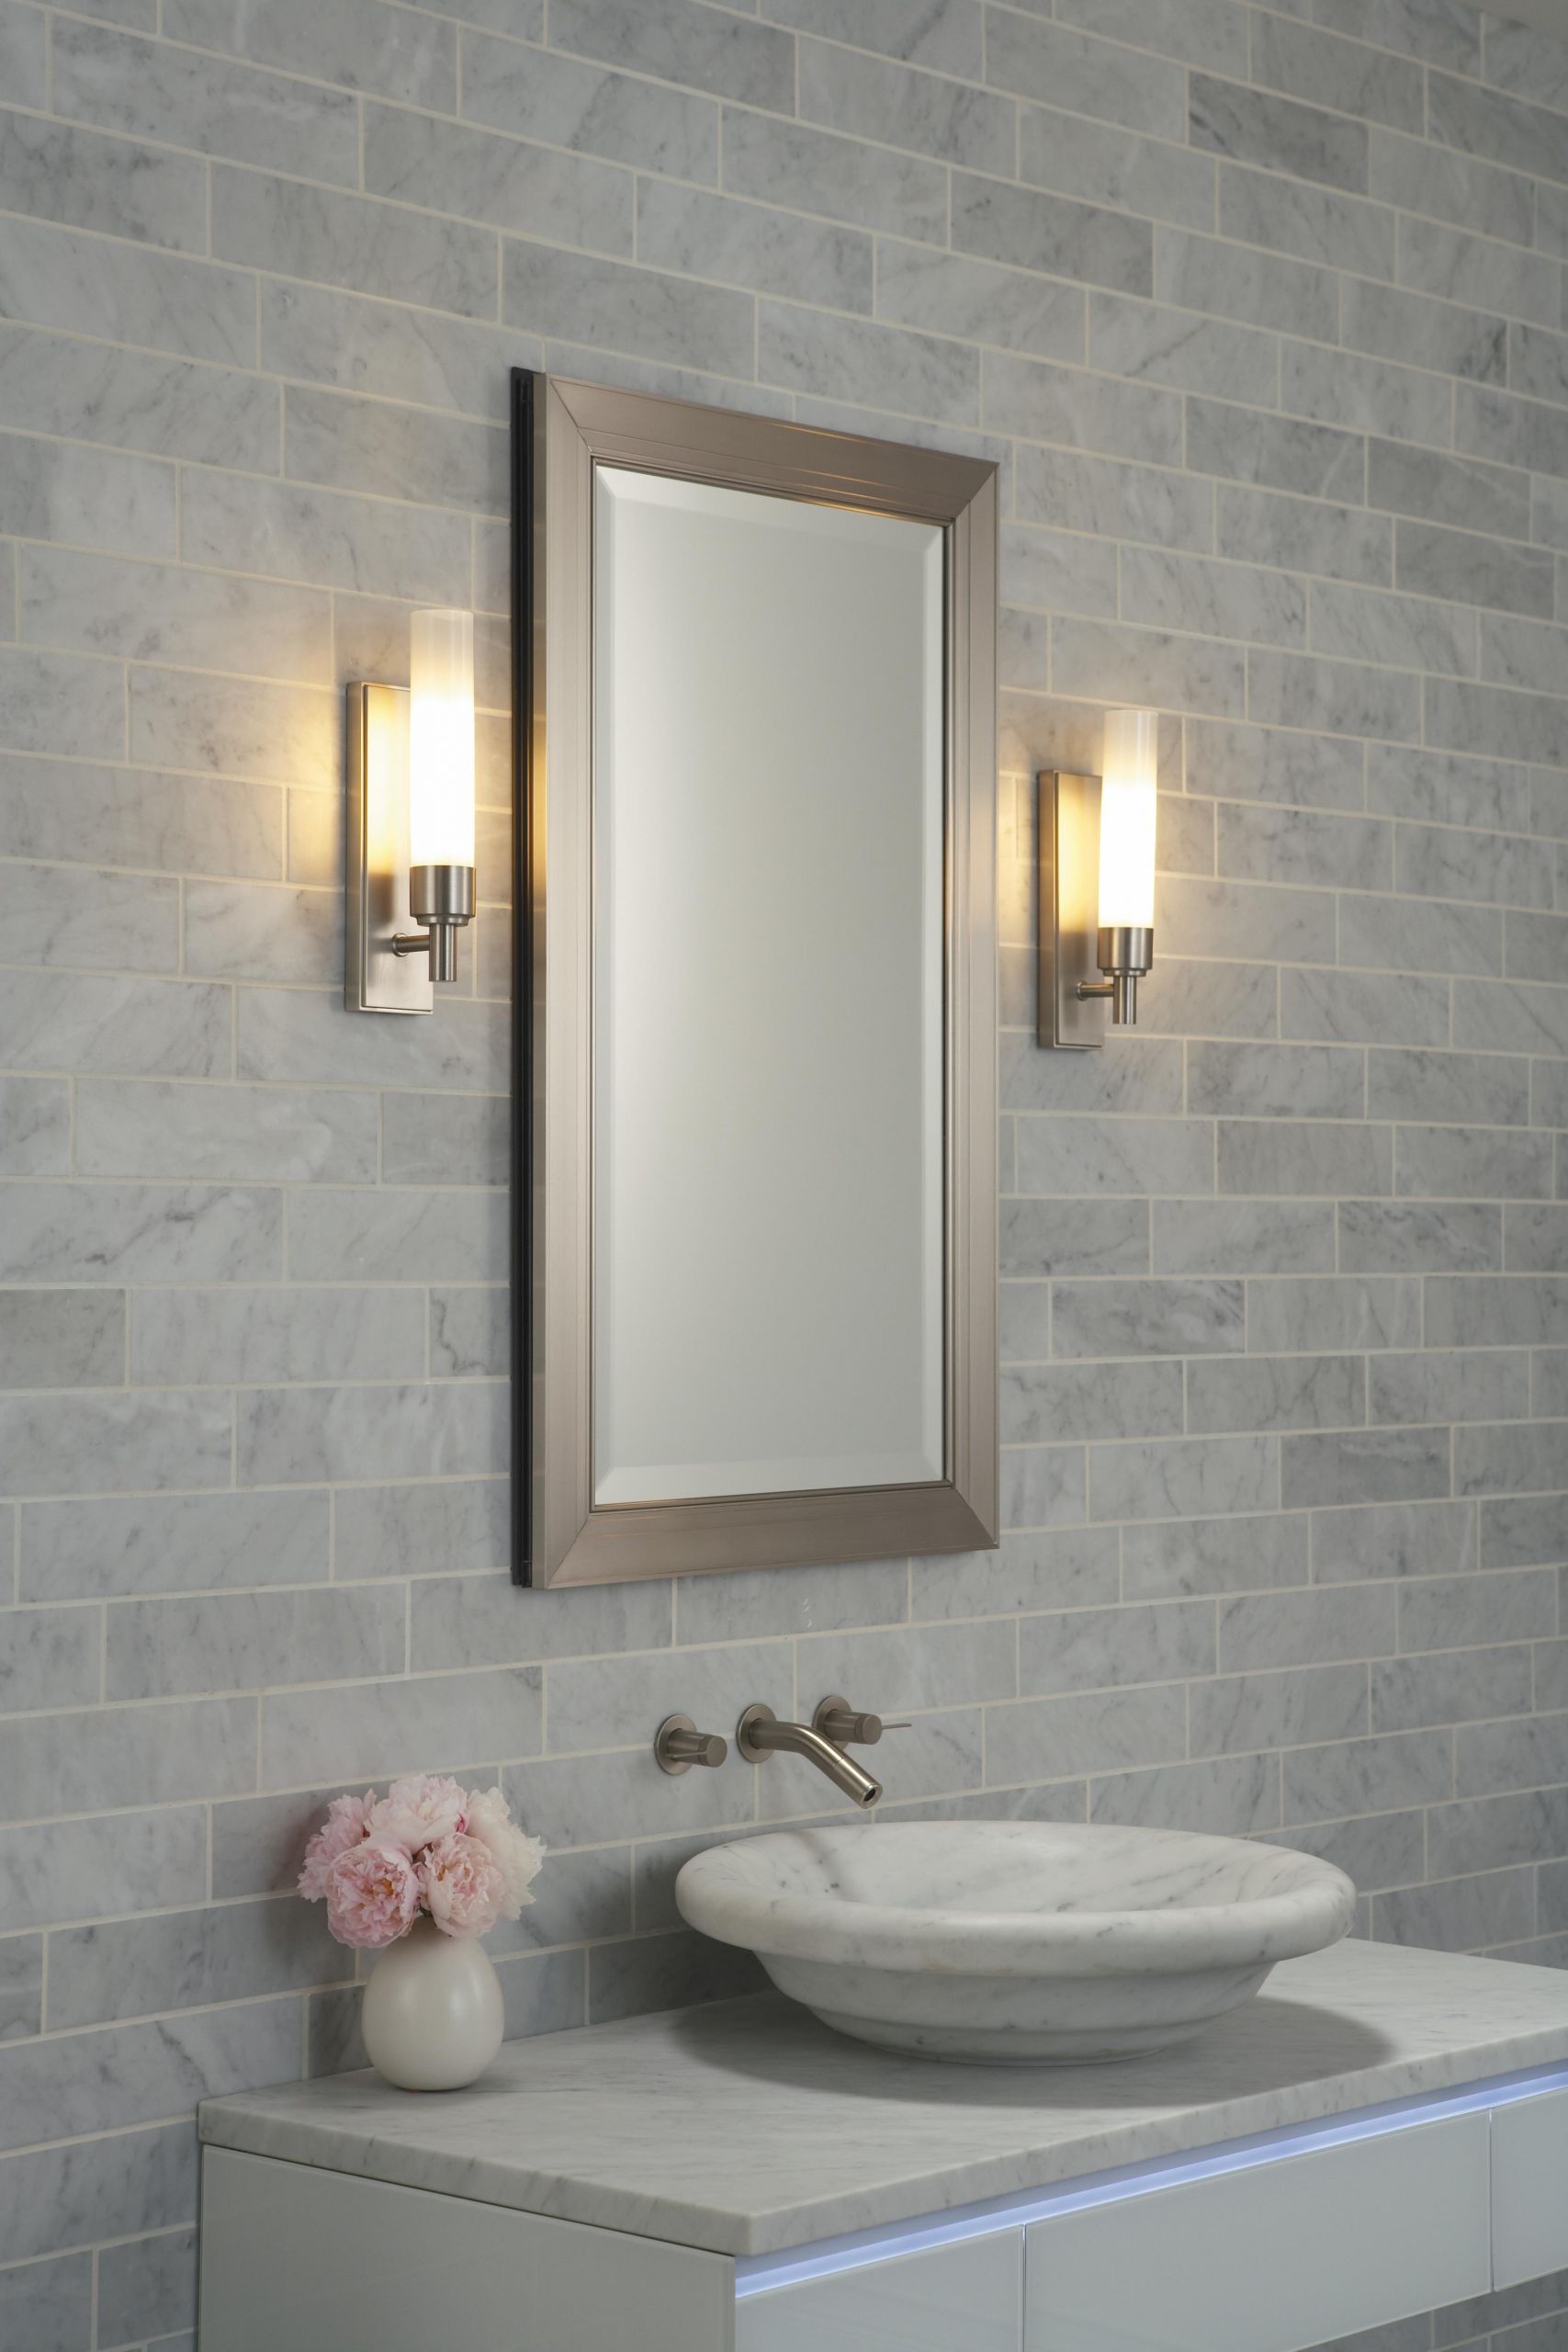 Bathroom Mirror Side Lights
 20 Best Collection of Fancy Bathroom Wall Mirrors